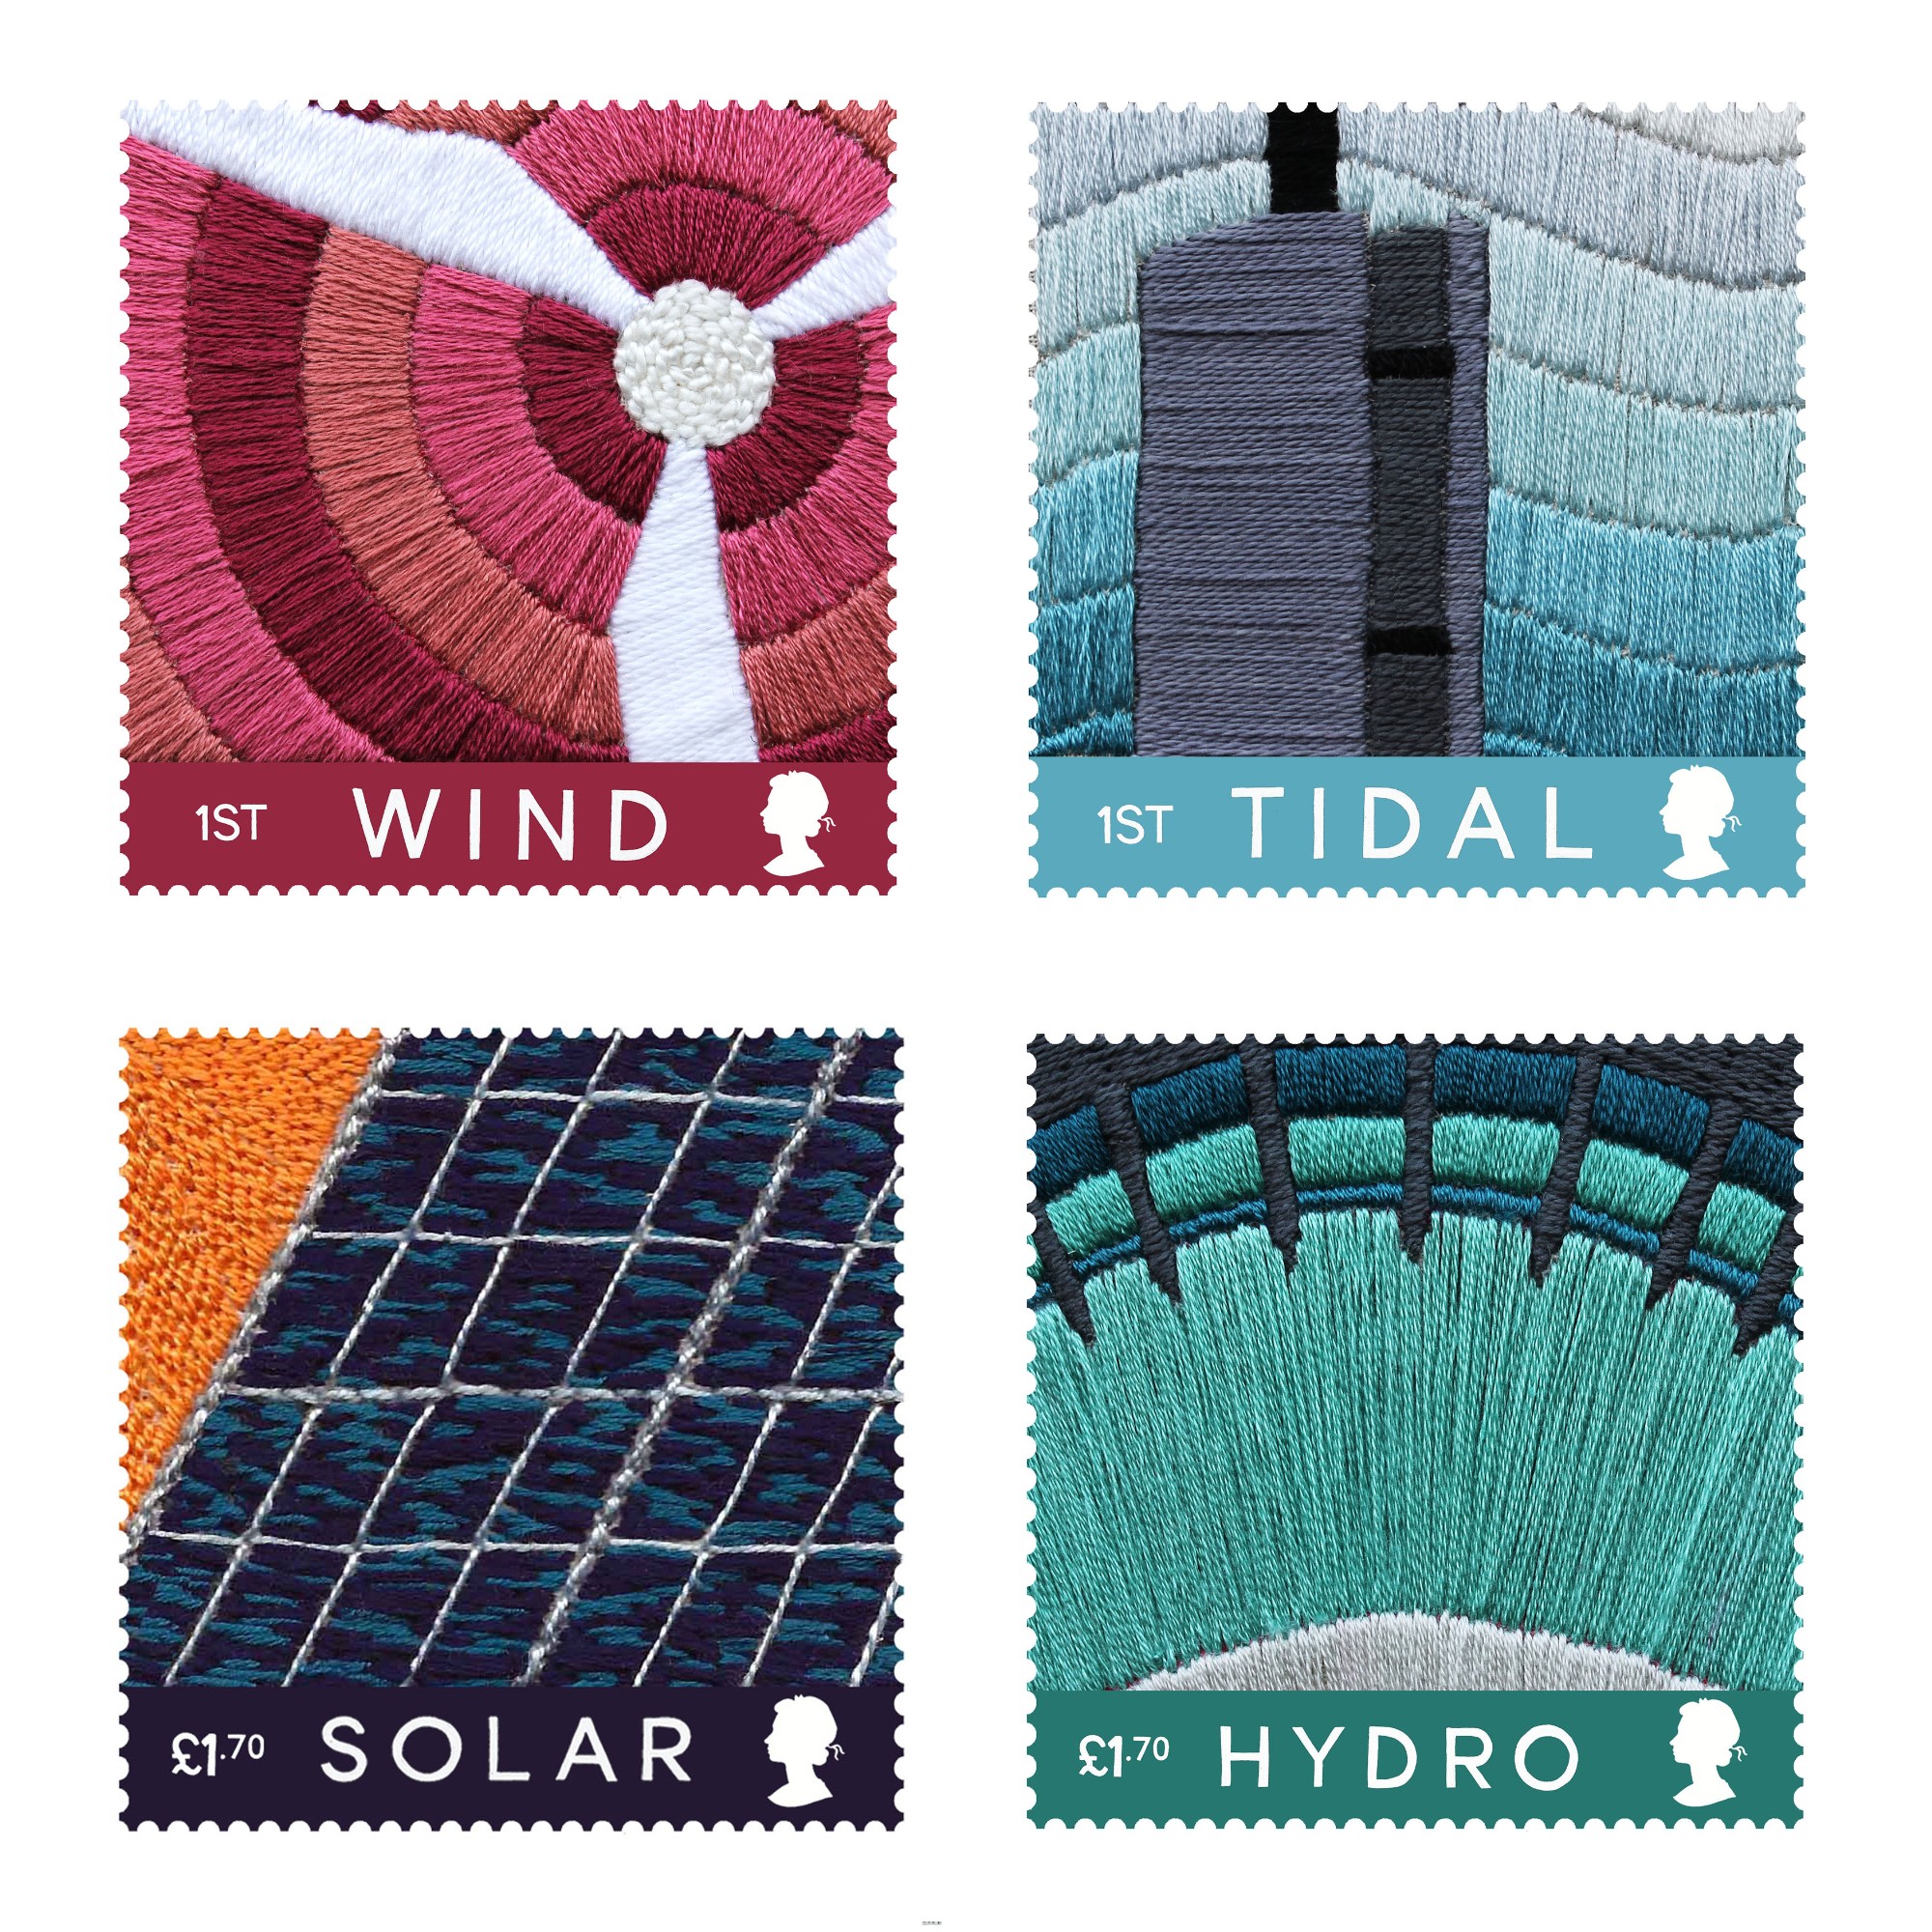 These embroidered postage stamp designs promote types of renewable energy.